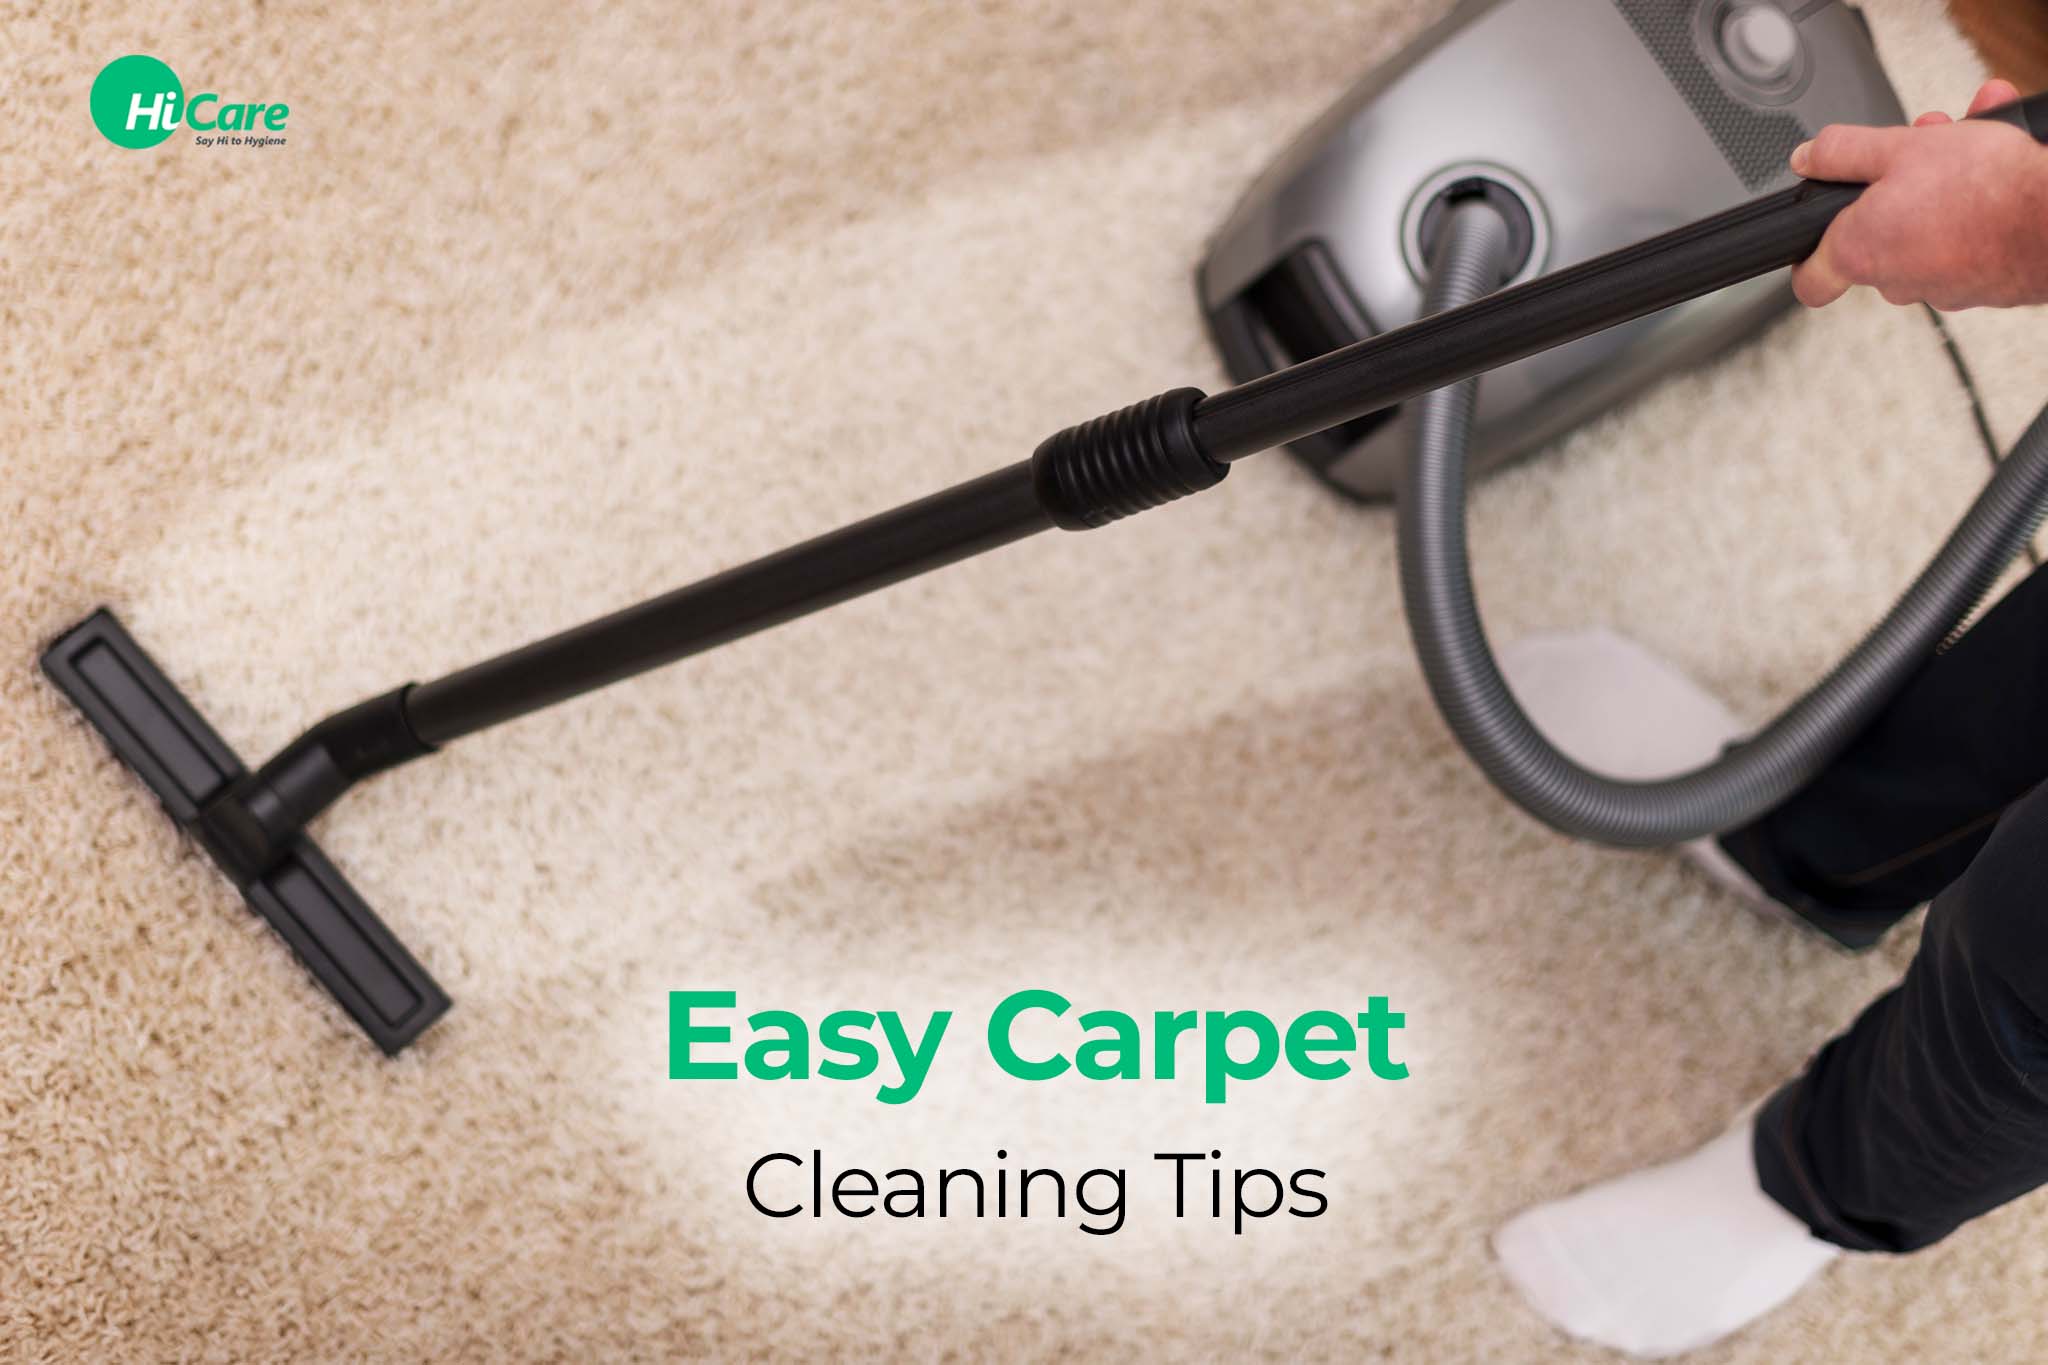 8 Easy Carpet Cleaning Tips